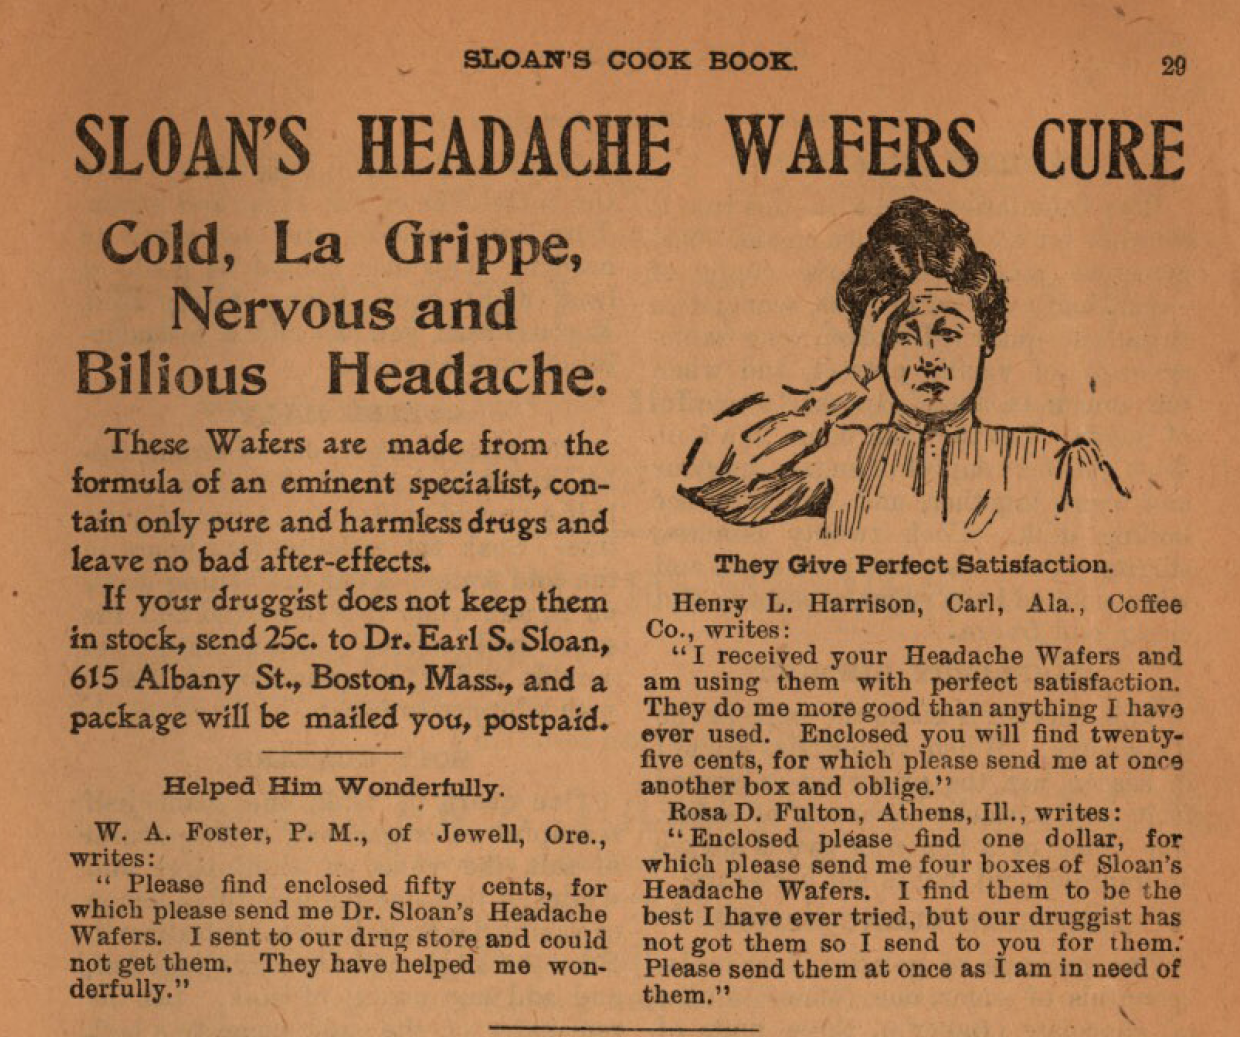 Kristin Holt | Victorian-American Headaches, Part 4. Advertisement for SLOAN'S HEADACHE WAFERS CURE, ad within Sloan's Cook Book and Advice to Housekeepers, published 1905. Image Text reads: "SLOAN'S HEADACHE WAFERS CURE. Cold, La Grippe, Nervous and Bilious Headache. These Wafers are made from the formula of an eminent specialist, contain only pure and harmless drugs and leave no bad after-effects. If your druggist does not keep themn in stock, send 25c. to Dr. Earl S. Sloan, 615 Albany St., Boston, Mass., and a package will be mailed to you, postpaid." Text continues with three quotations from letters, containing testimonials. An illustration shows a middle-aged woman, hand to head, in evident pain.